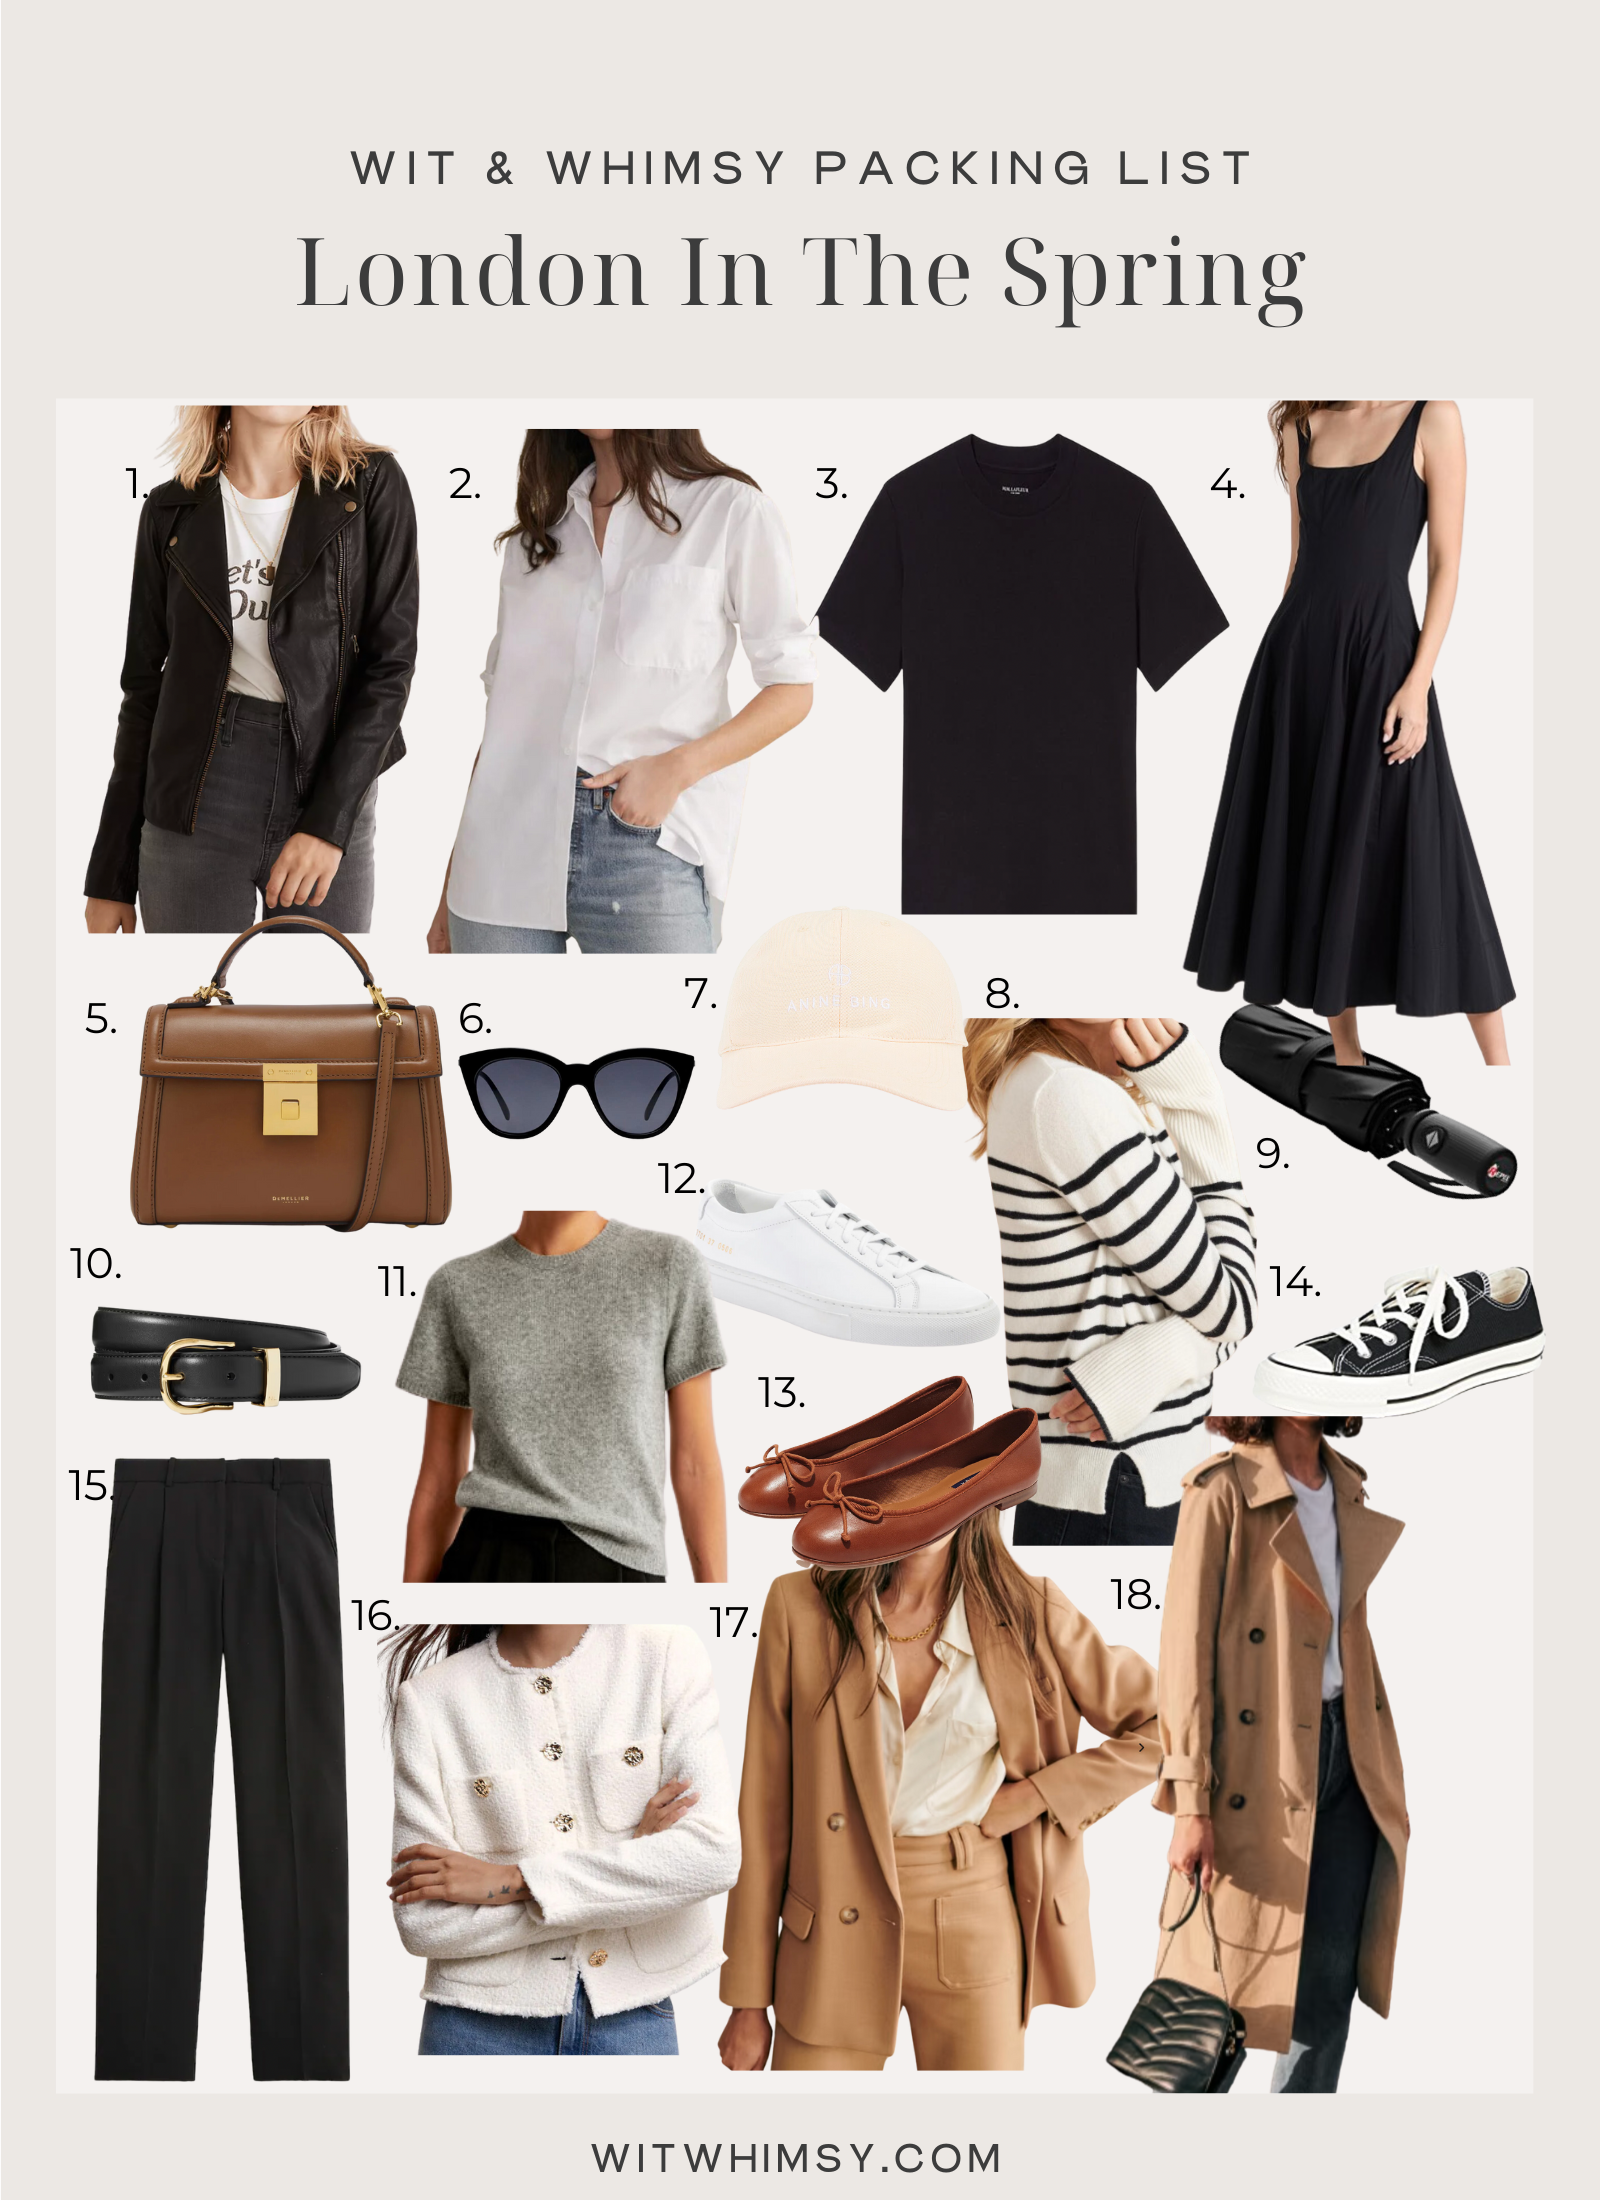 London in Spring Packing List